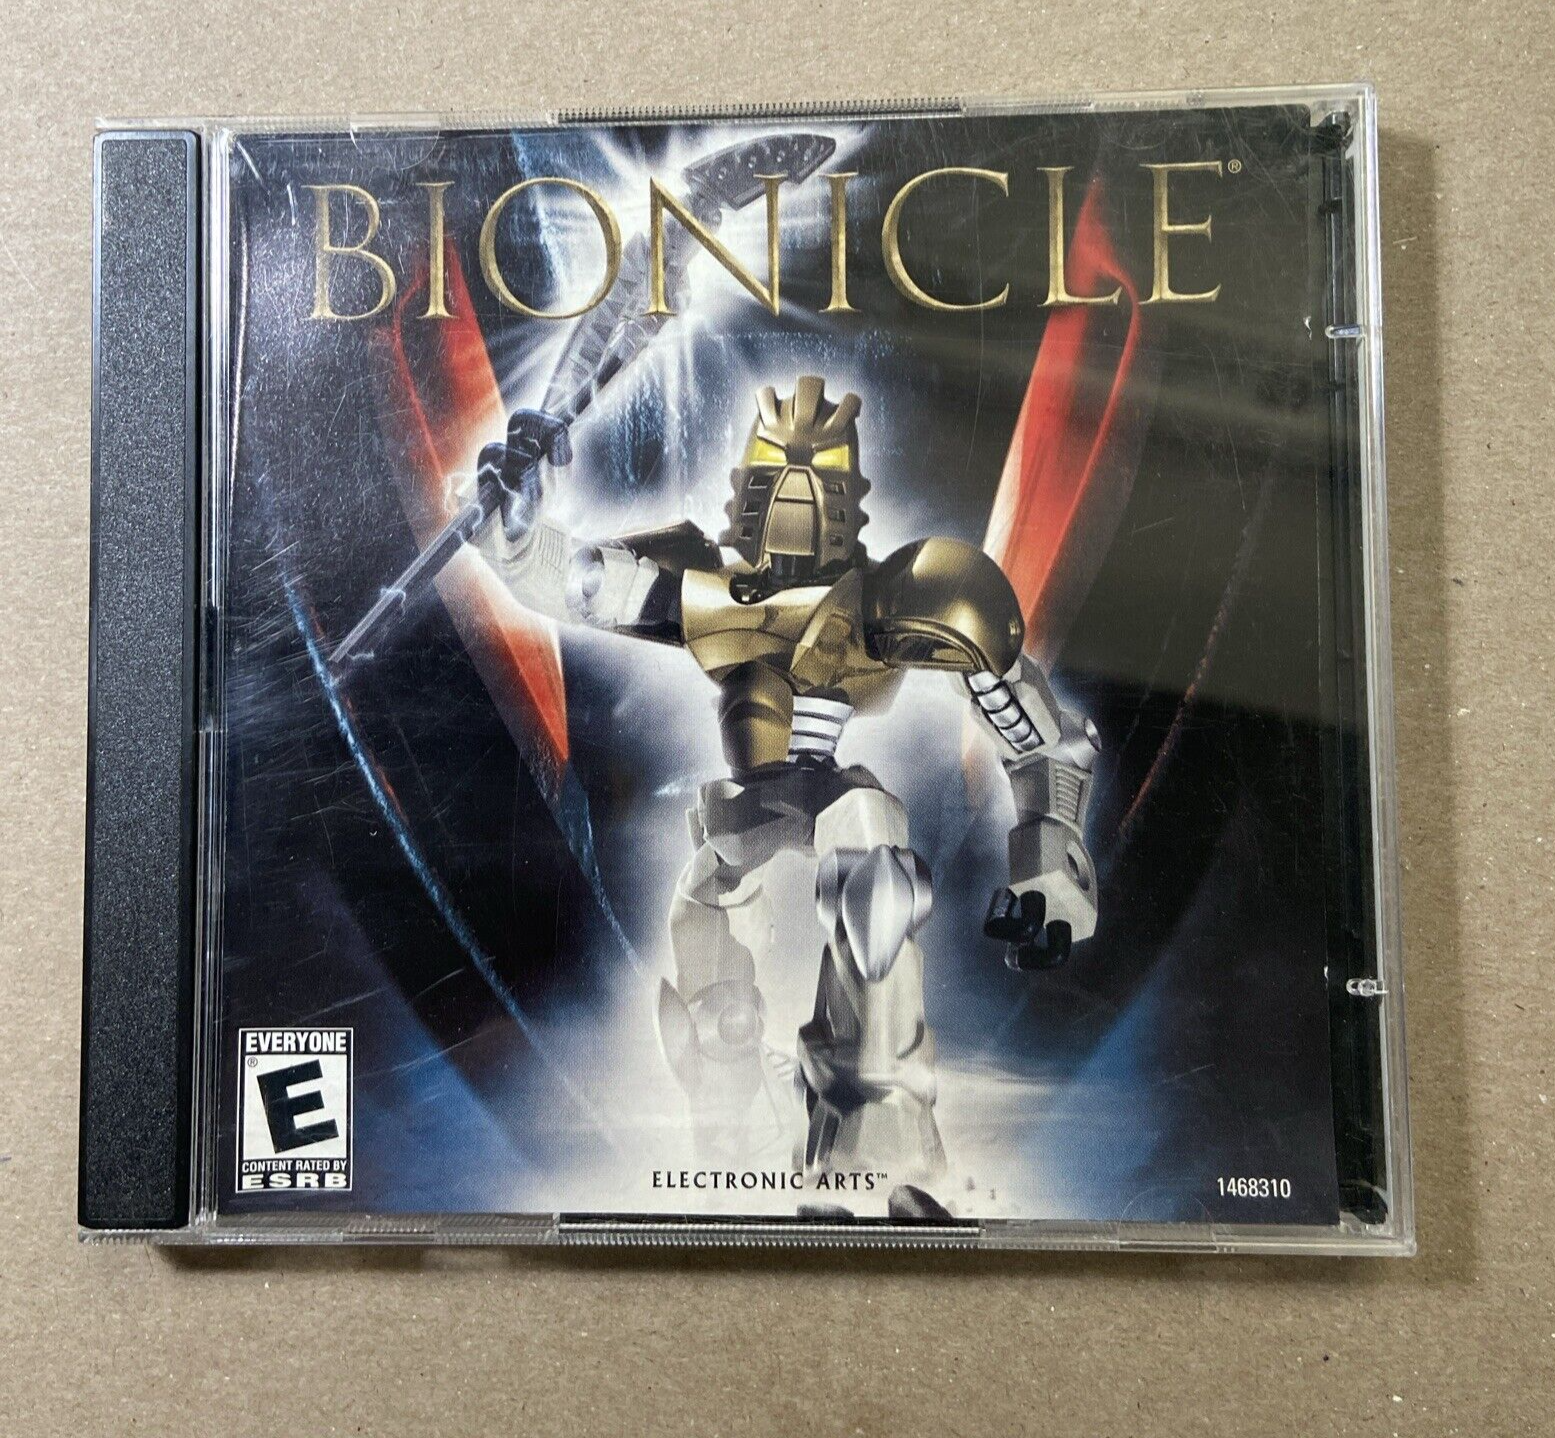 Bionicle 2-Disc PC CD Rom Game Lego 2003 complete in Jewel Case - $7.87